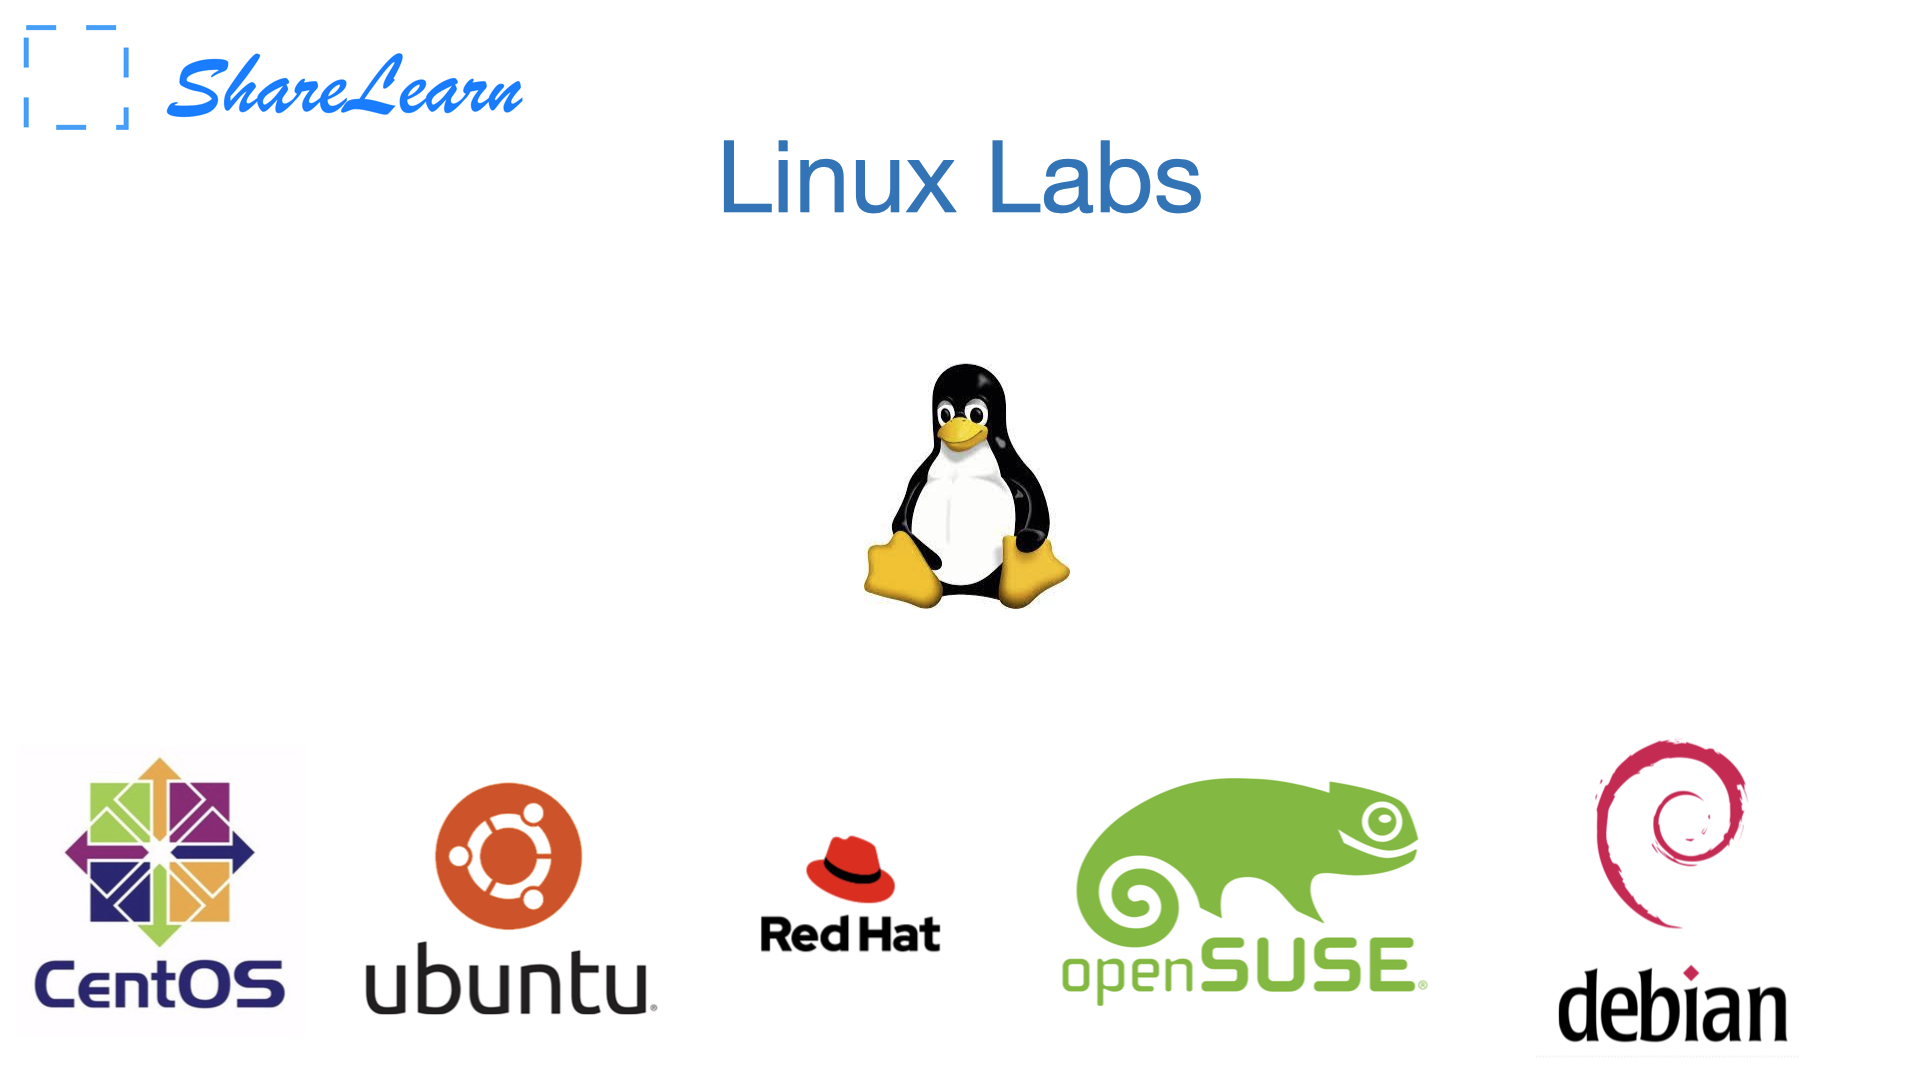 Linux labs